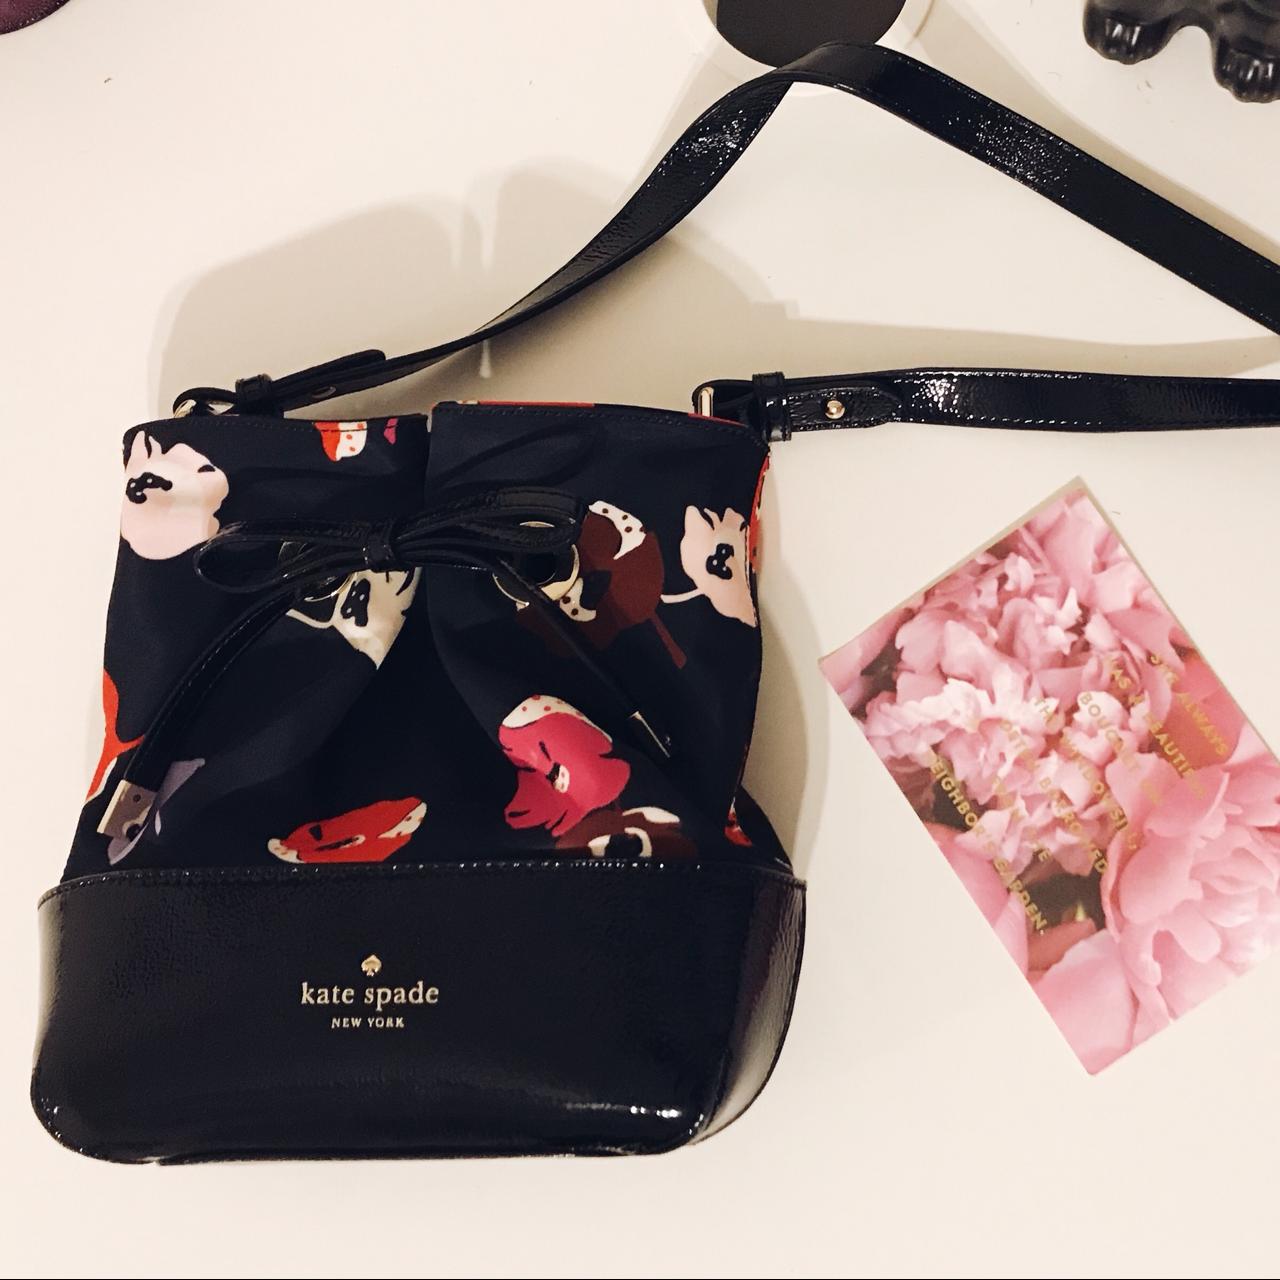 kate spade new york Embroidered Floral Bags & Handbags for Women for sale |  eBay